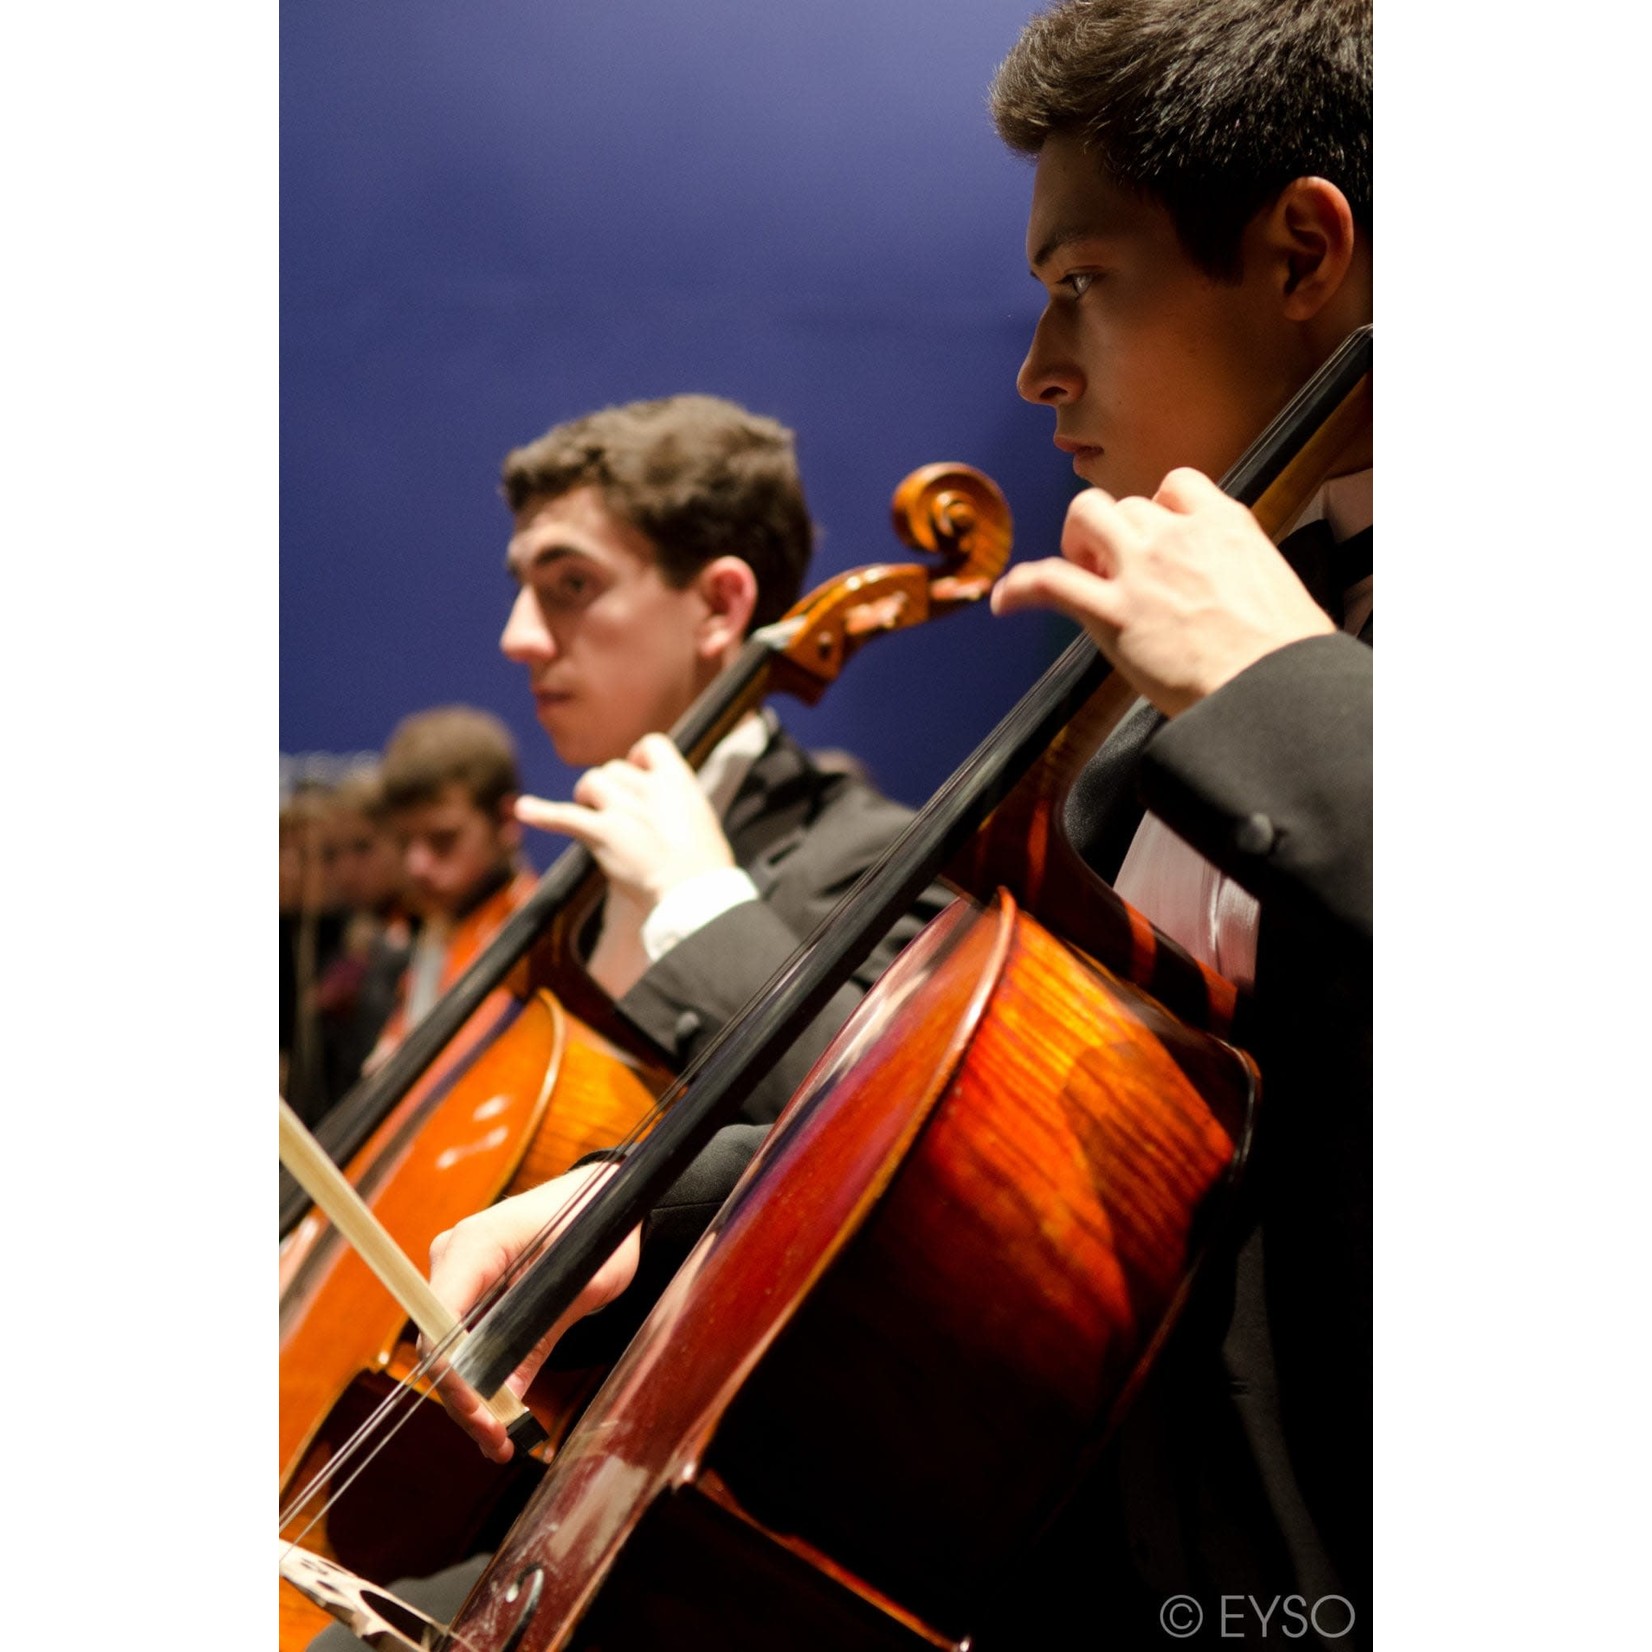 Elgin Youth Symphony Orchestra Elgin Youth Symphony $54 PAIR Concert tickets  3/12@ 2, 4:30, or 7pm